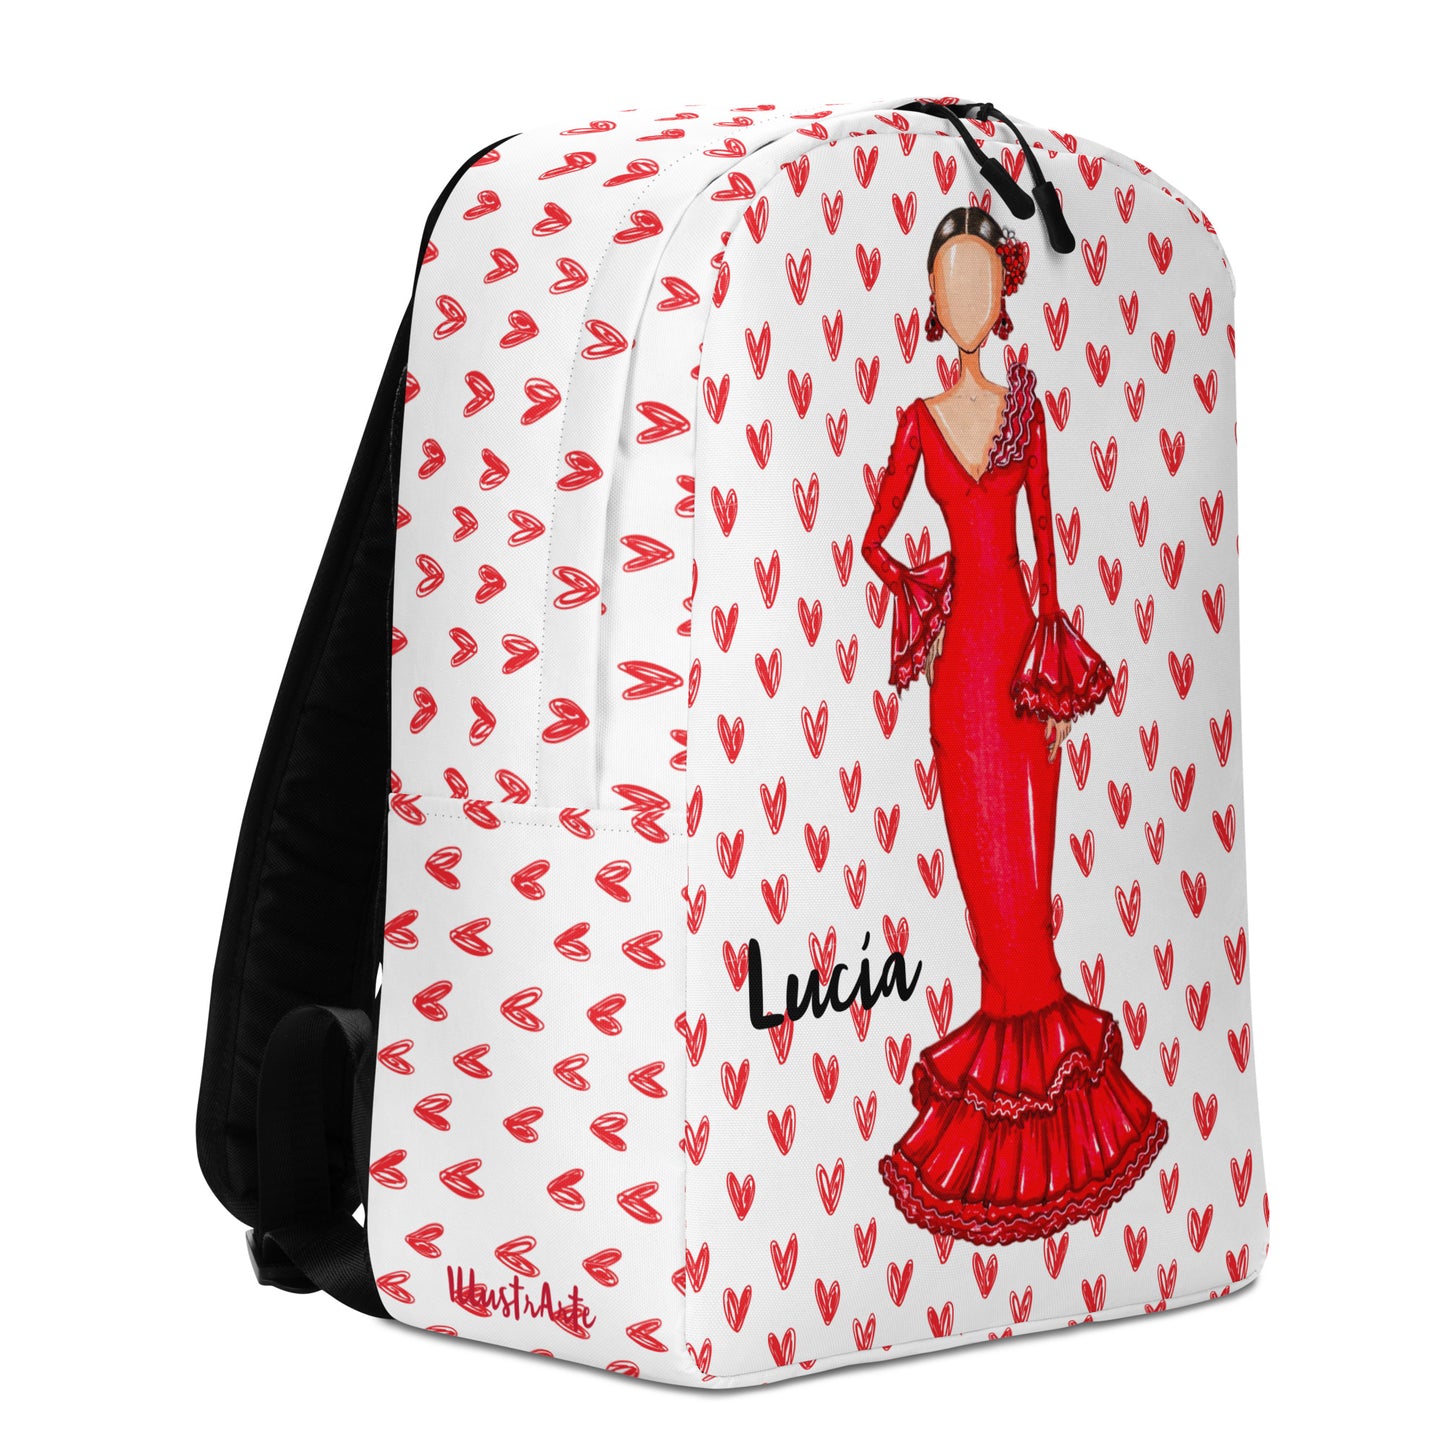 Flamenco Dancer Customizable Backpack, red dress with red hearts design. - IllustrArte